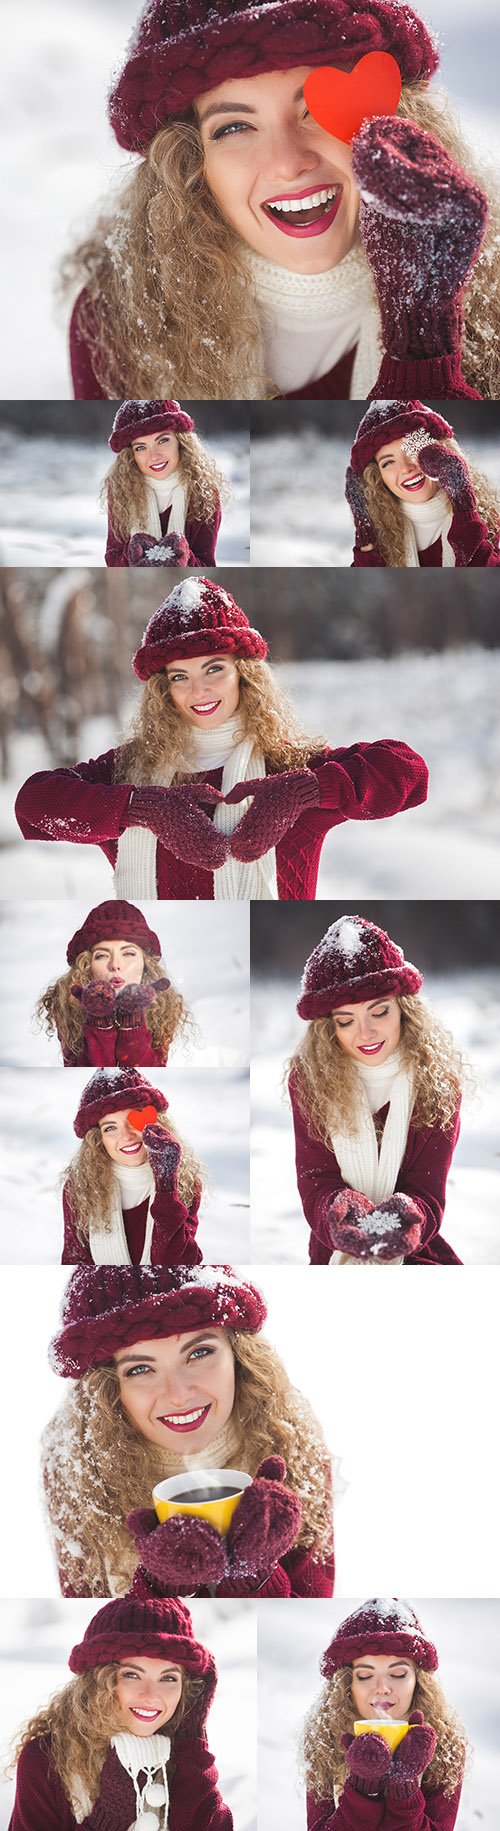 Young girl in cold with decorative heart and snowflake